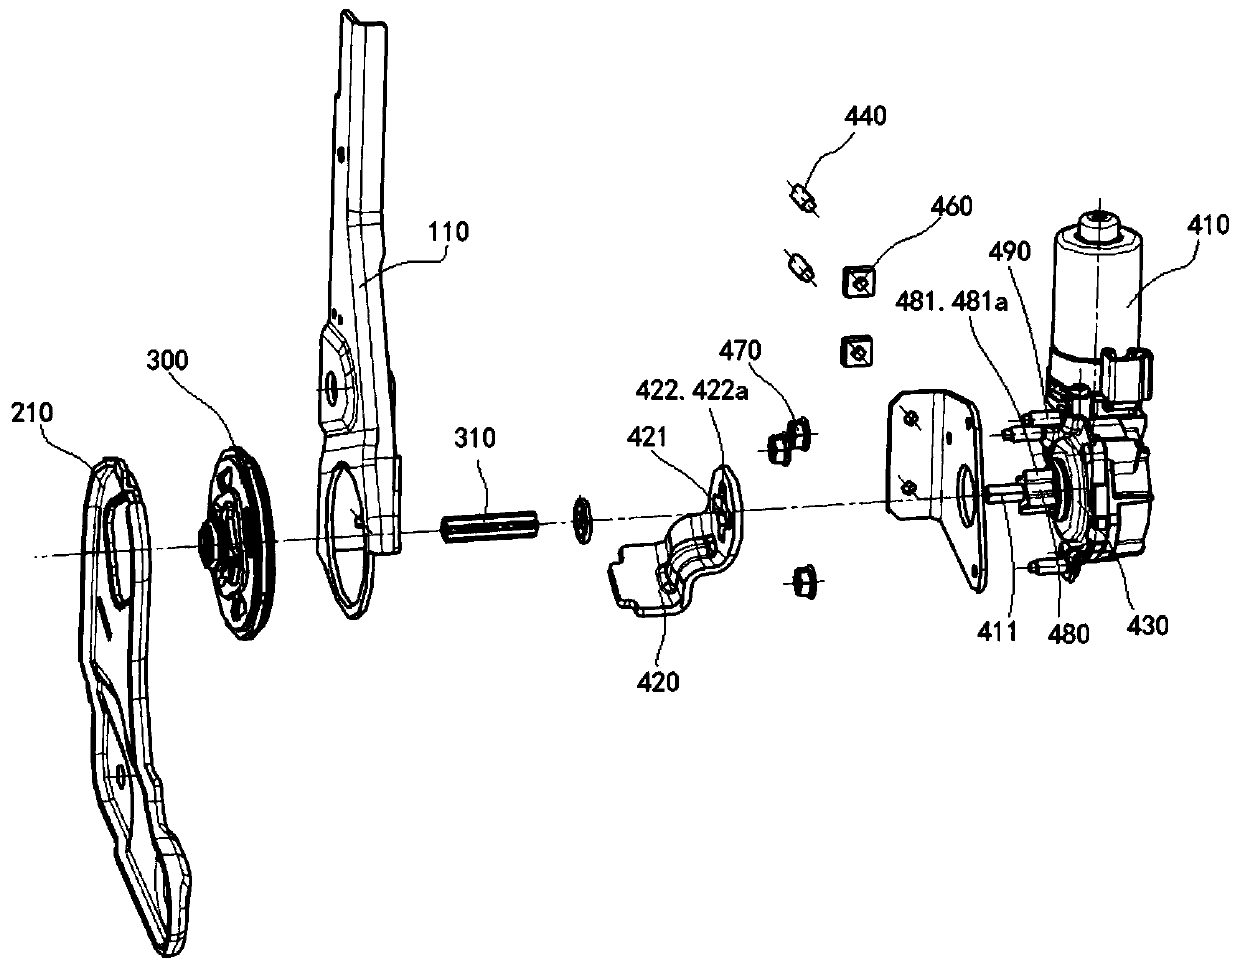 A new single-motor-driven unlocking and folding mechanism and its application